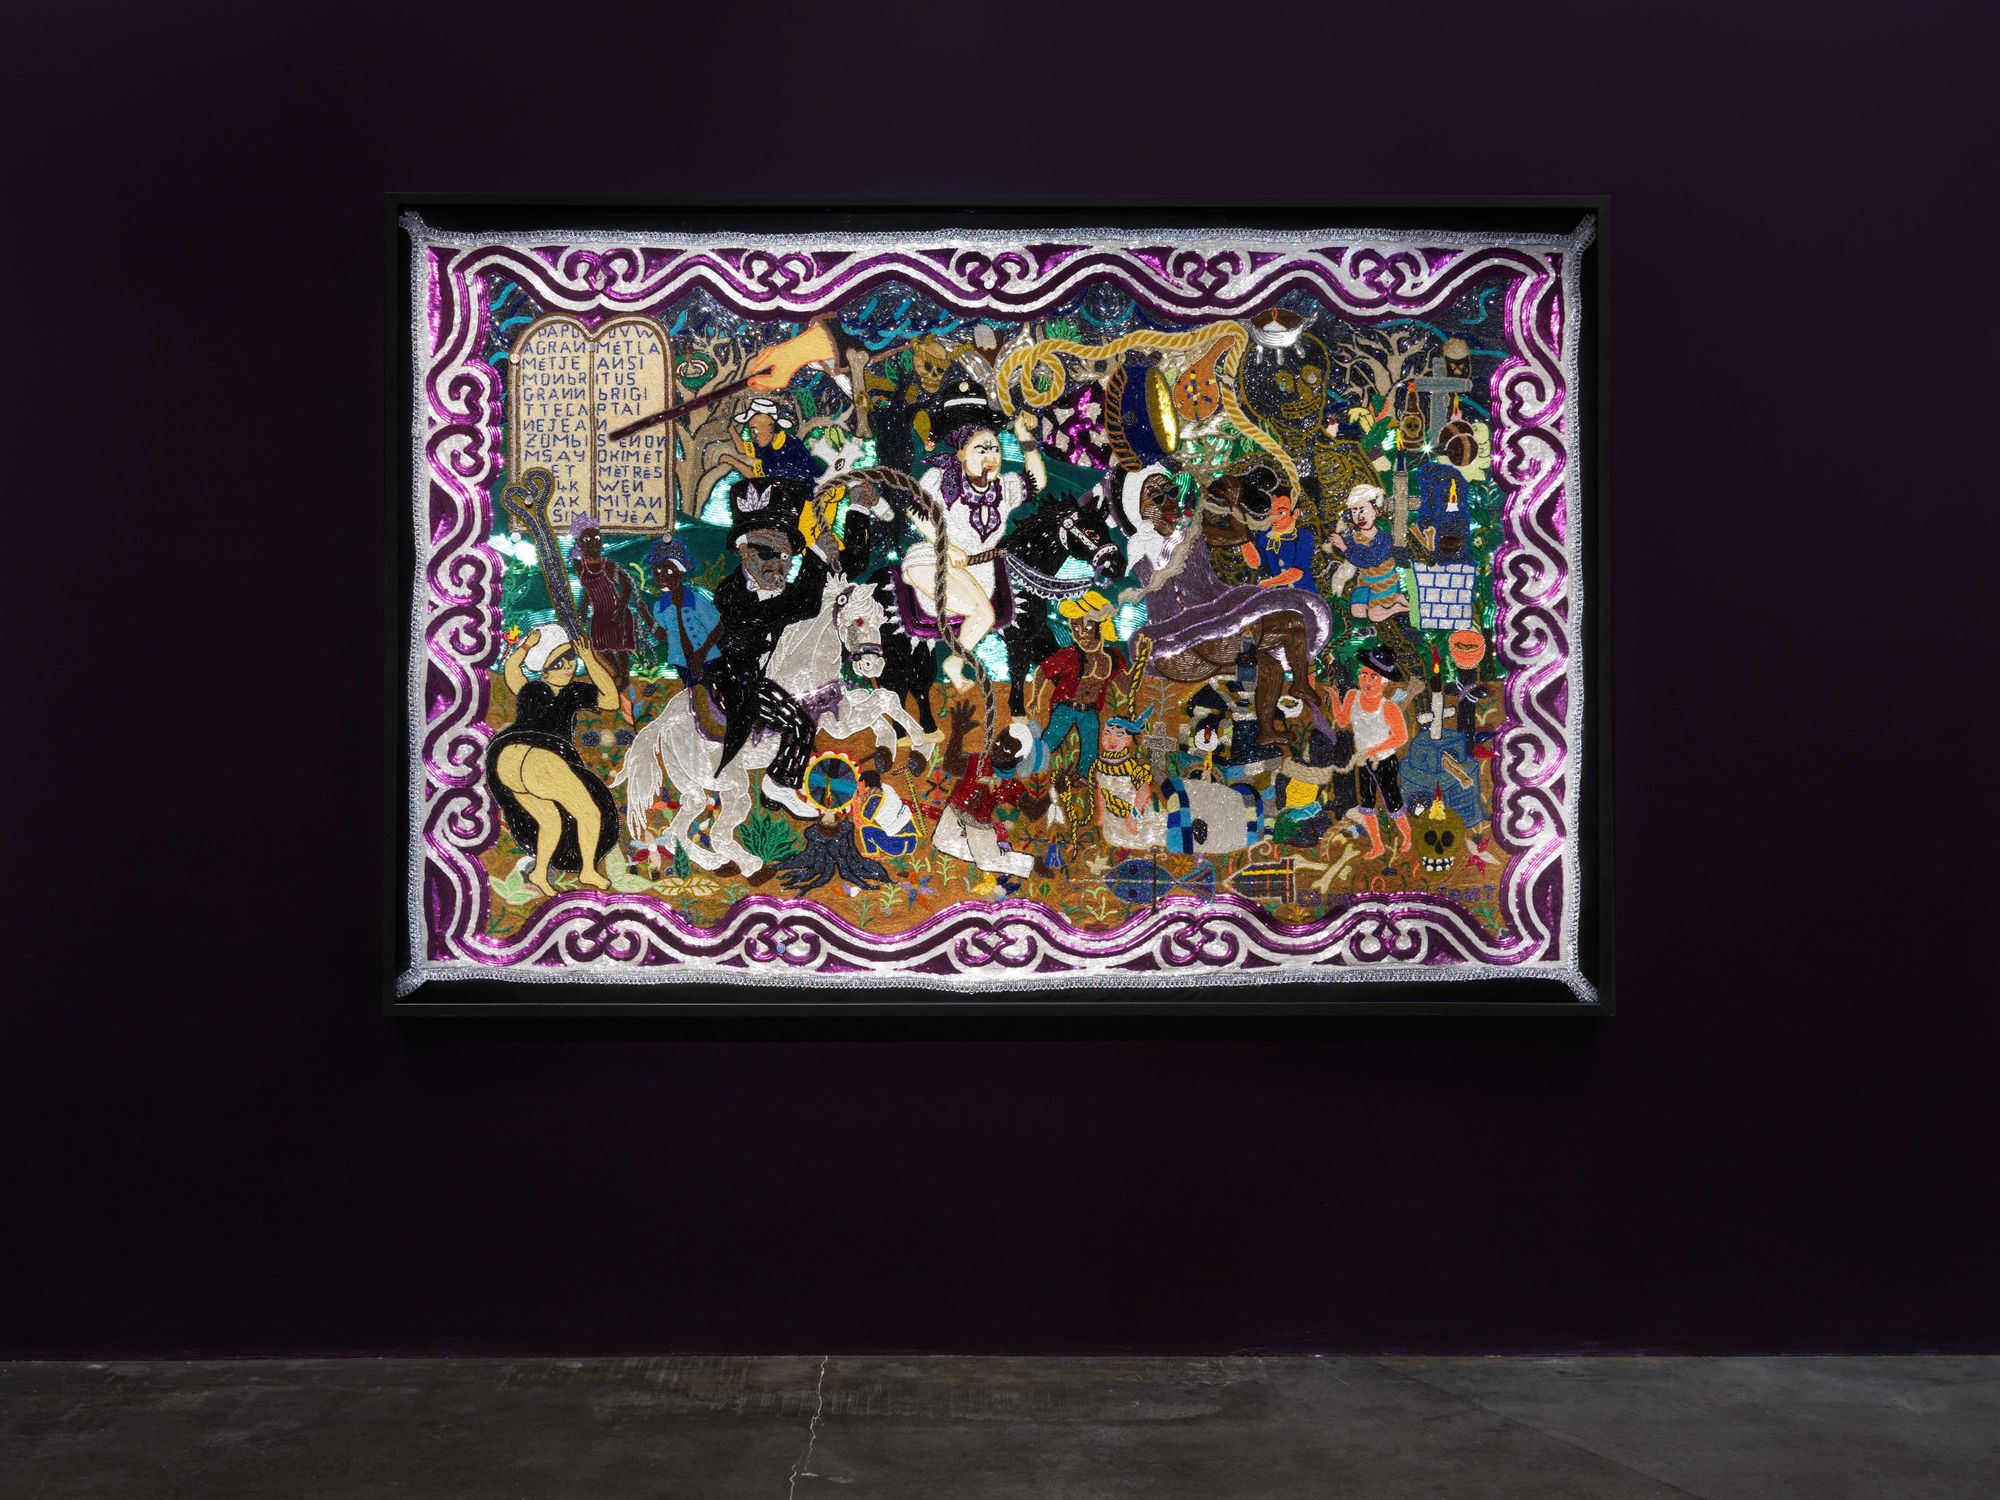 A colorful, sequined tapestry against a dark background